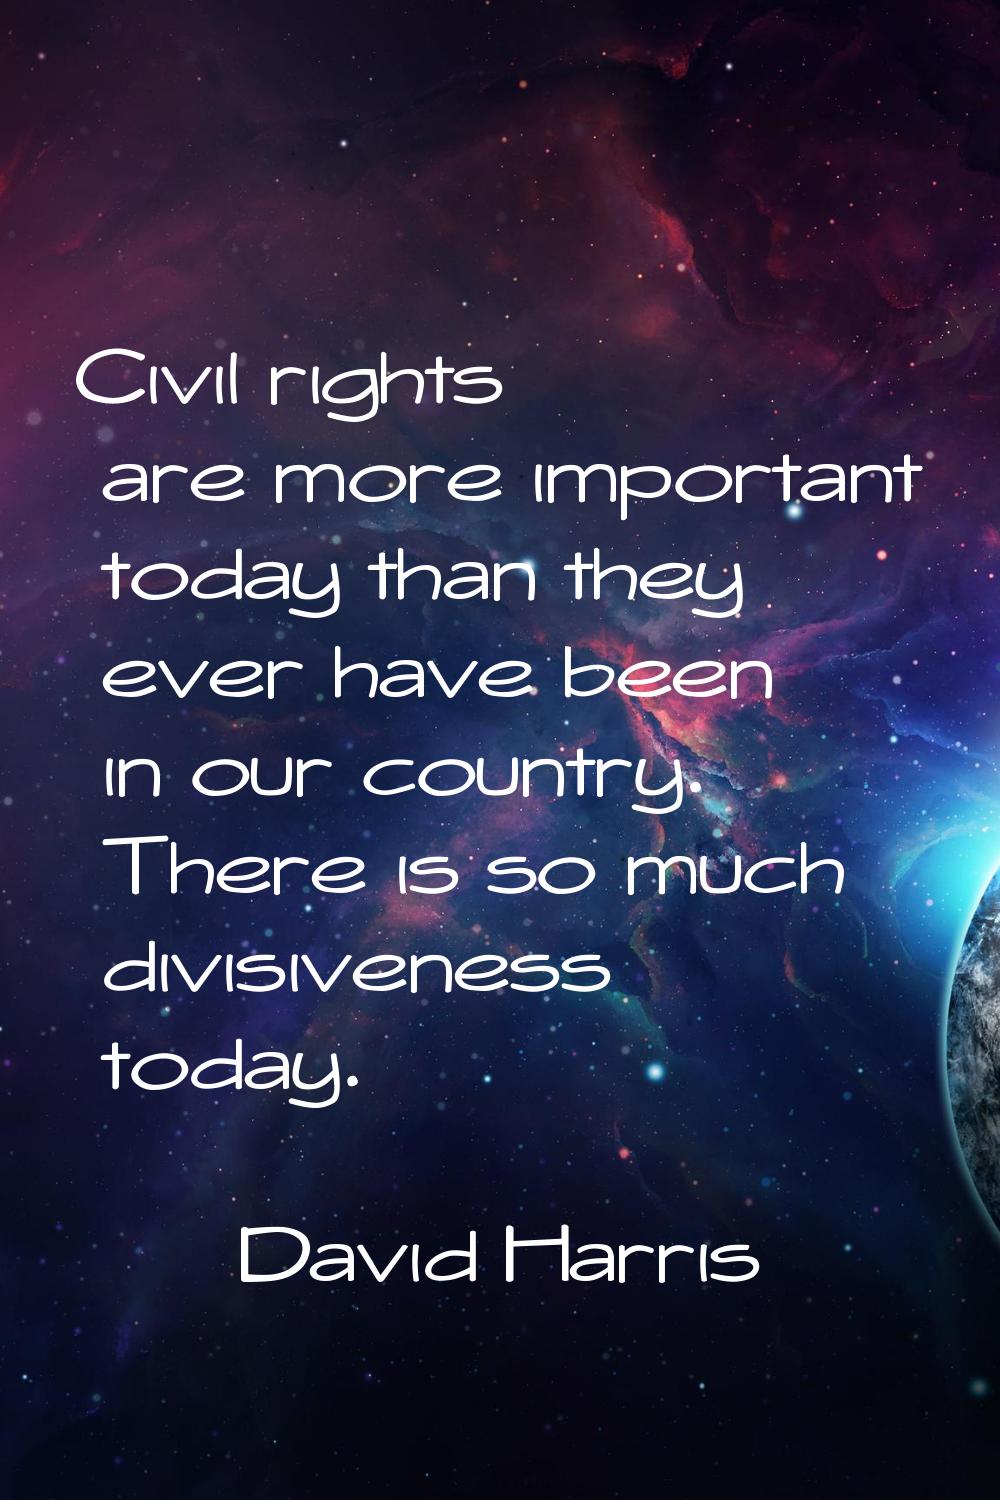 Civil rights are more important today than they ever have been in our country. There is so much div